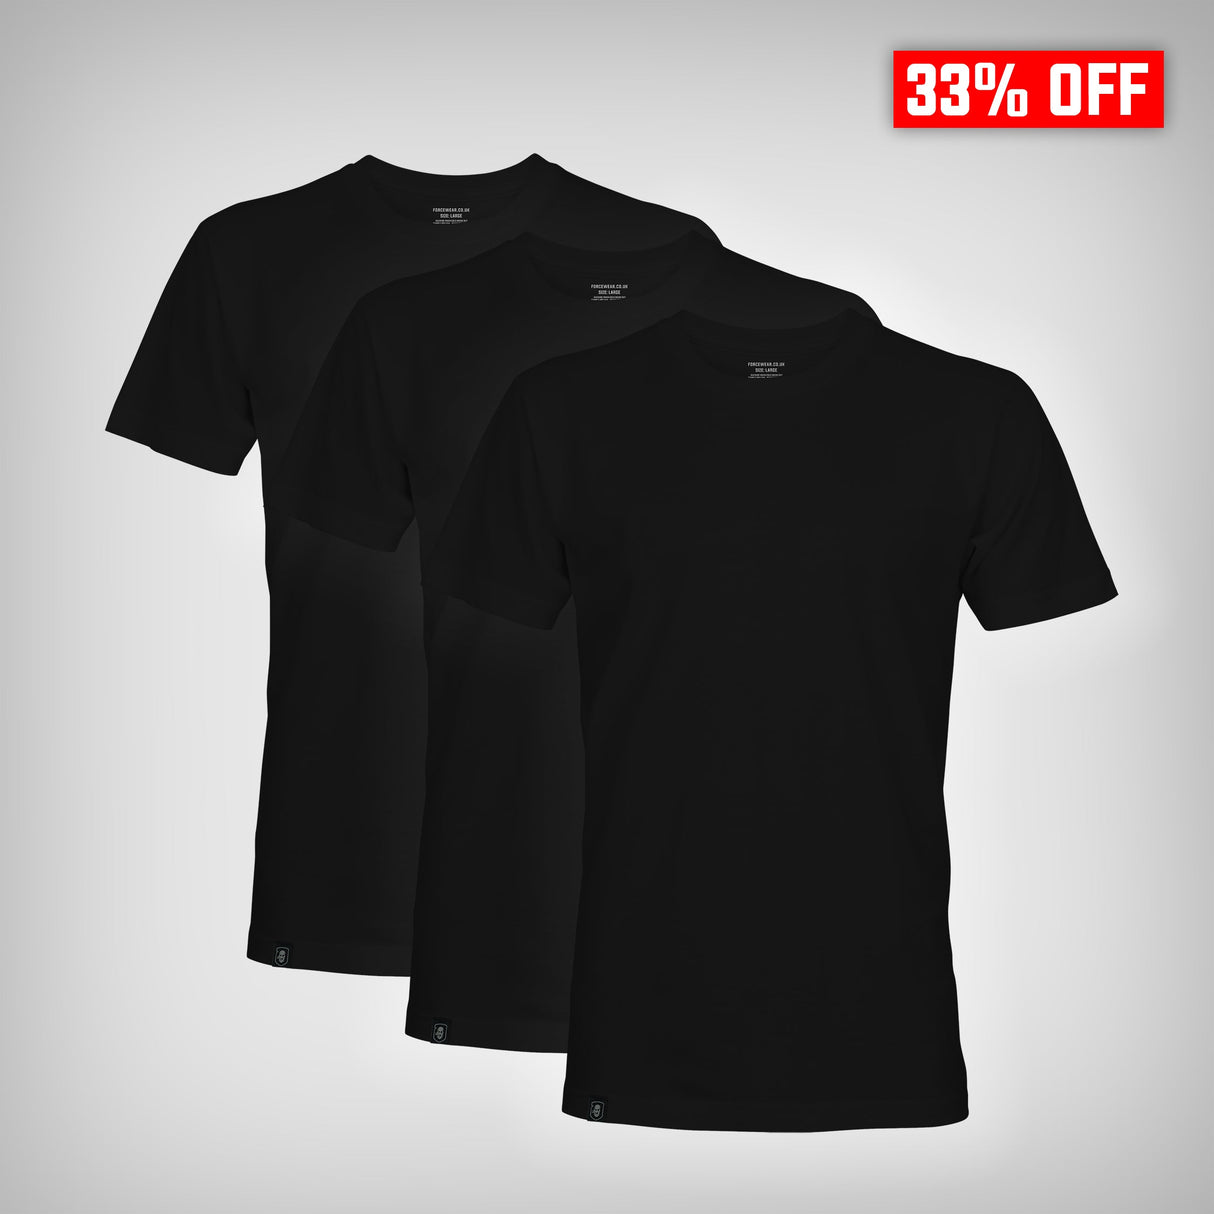 3 PACK CREW T-SHIRT / BLACK (UP TO 5XL) - Force Wear HQ - T-SHIRTS